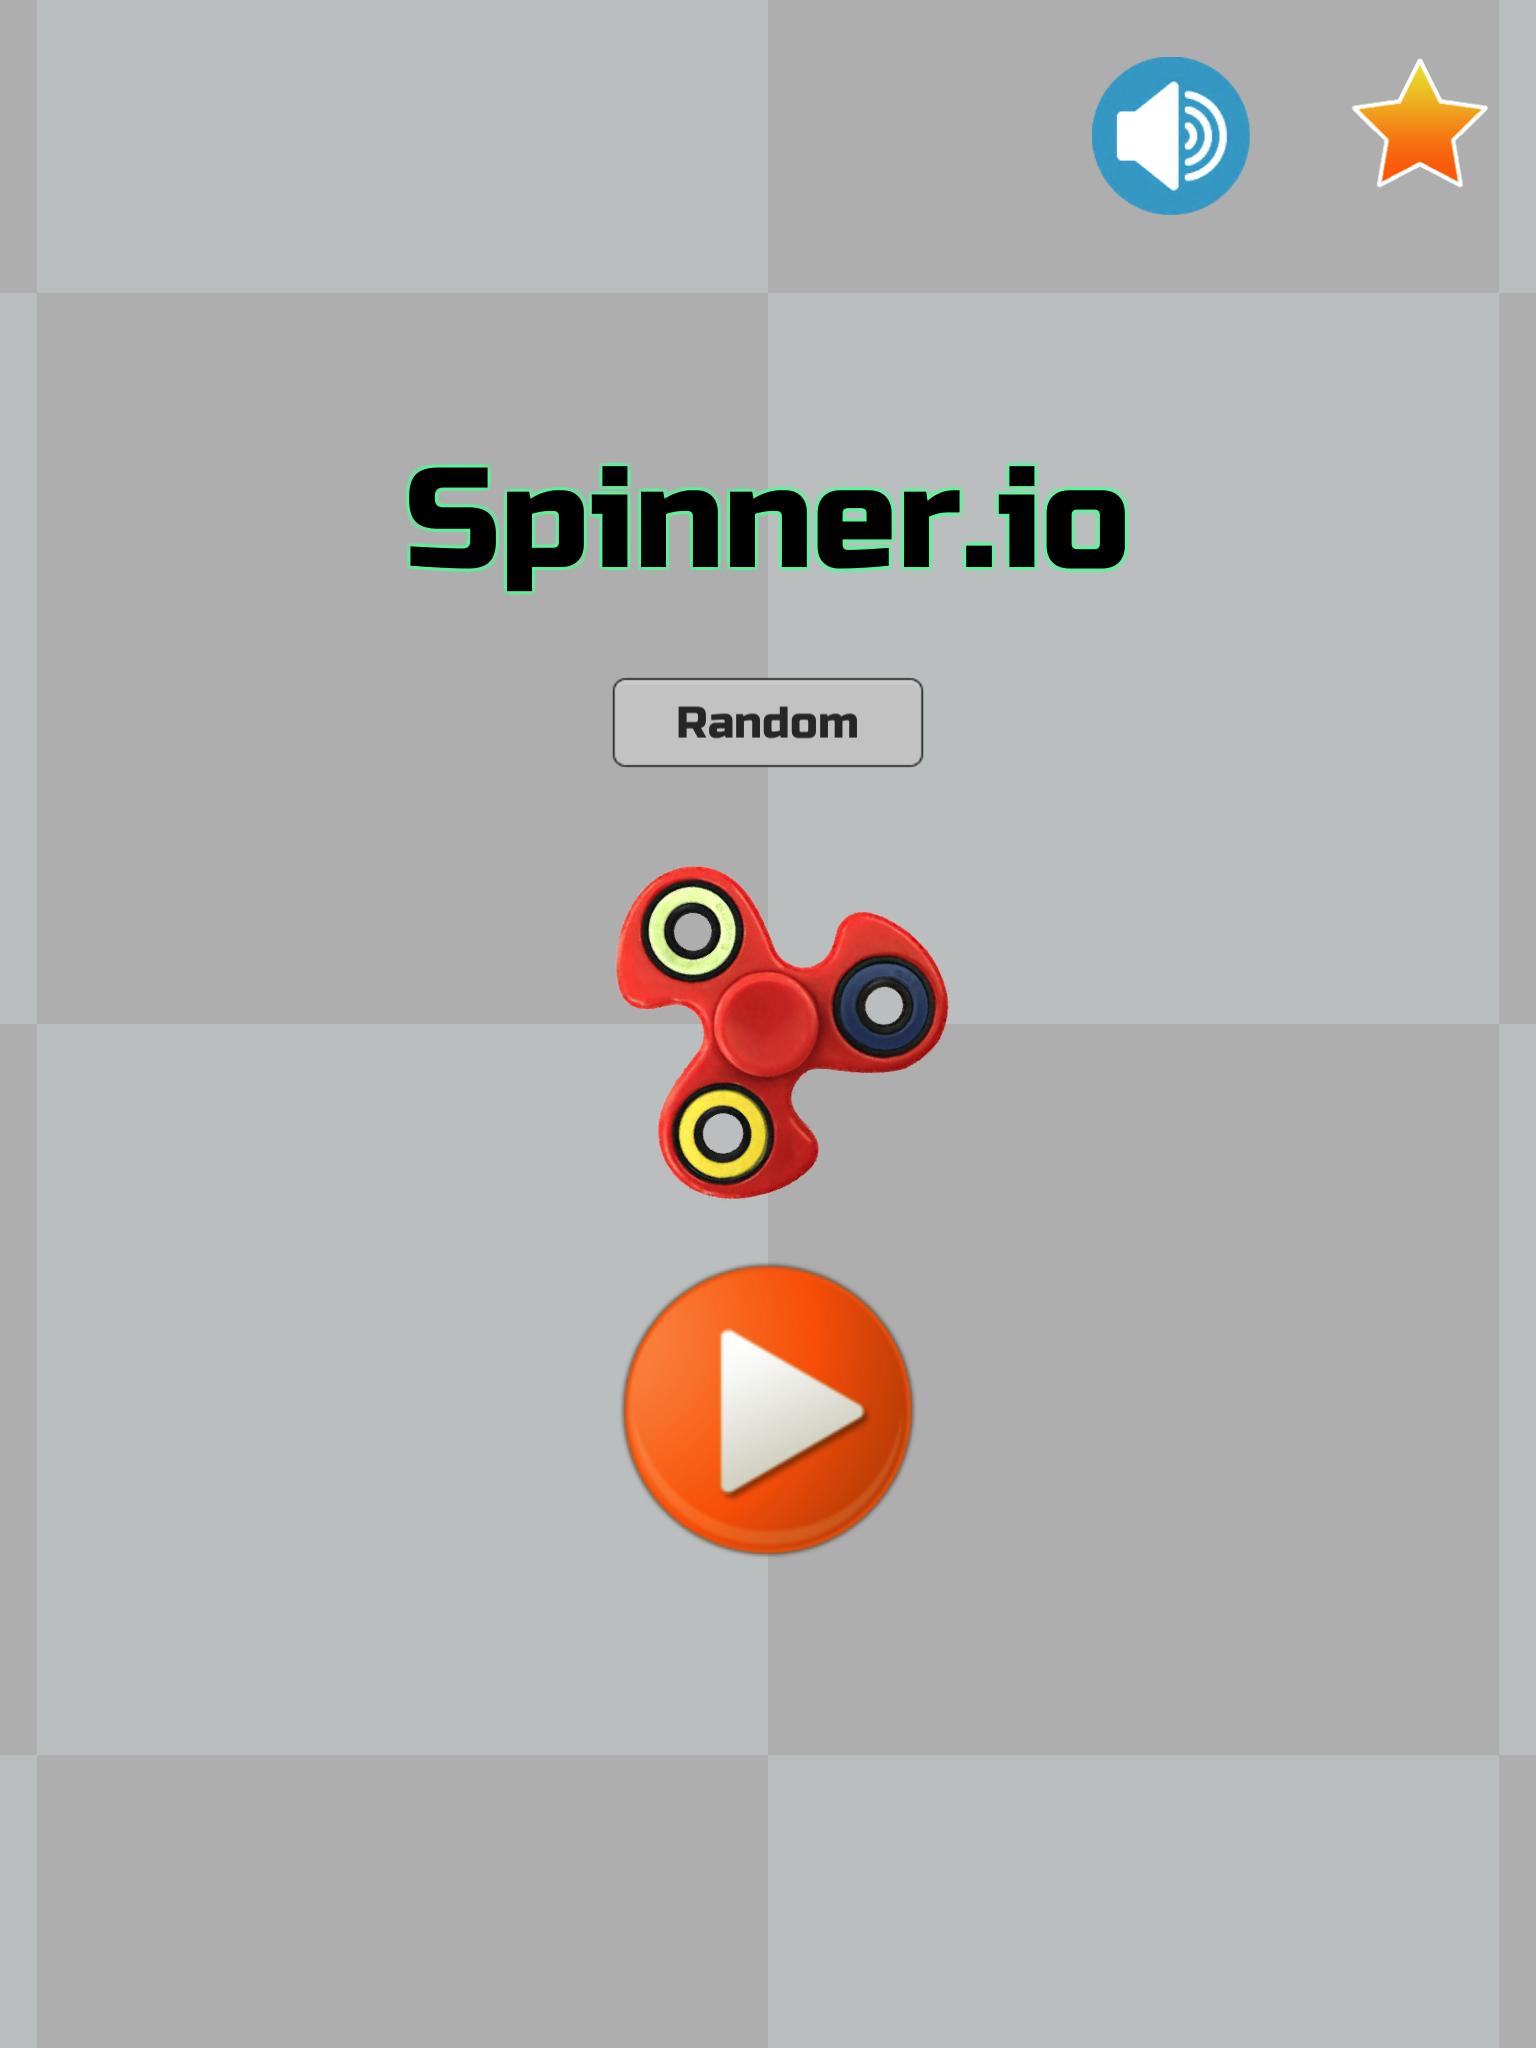 Anime Fidget Spinner Battle Game for Android - Download